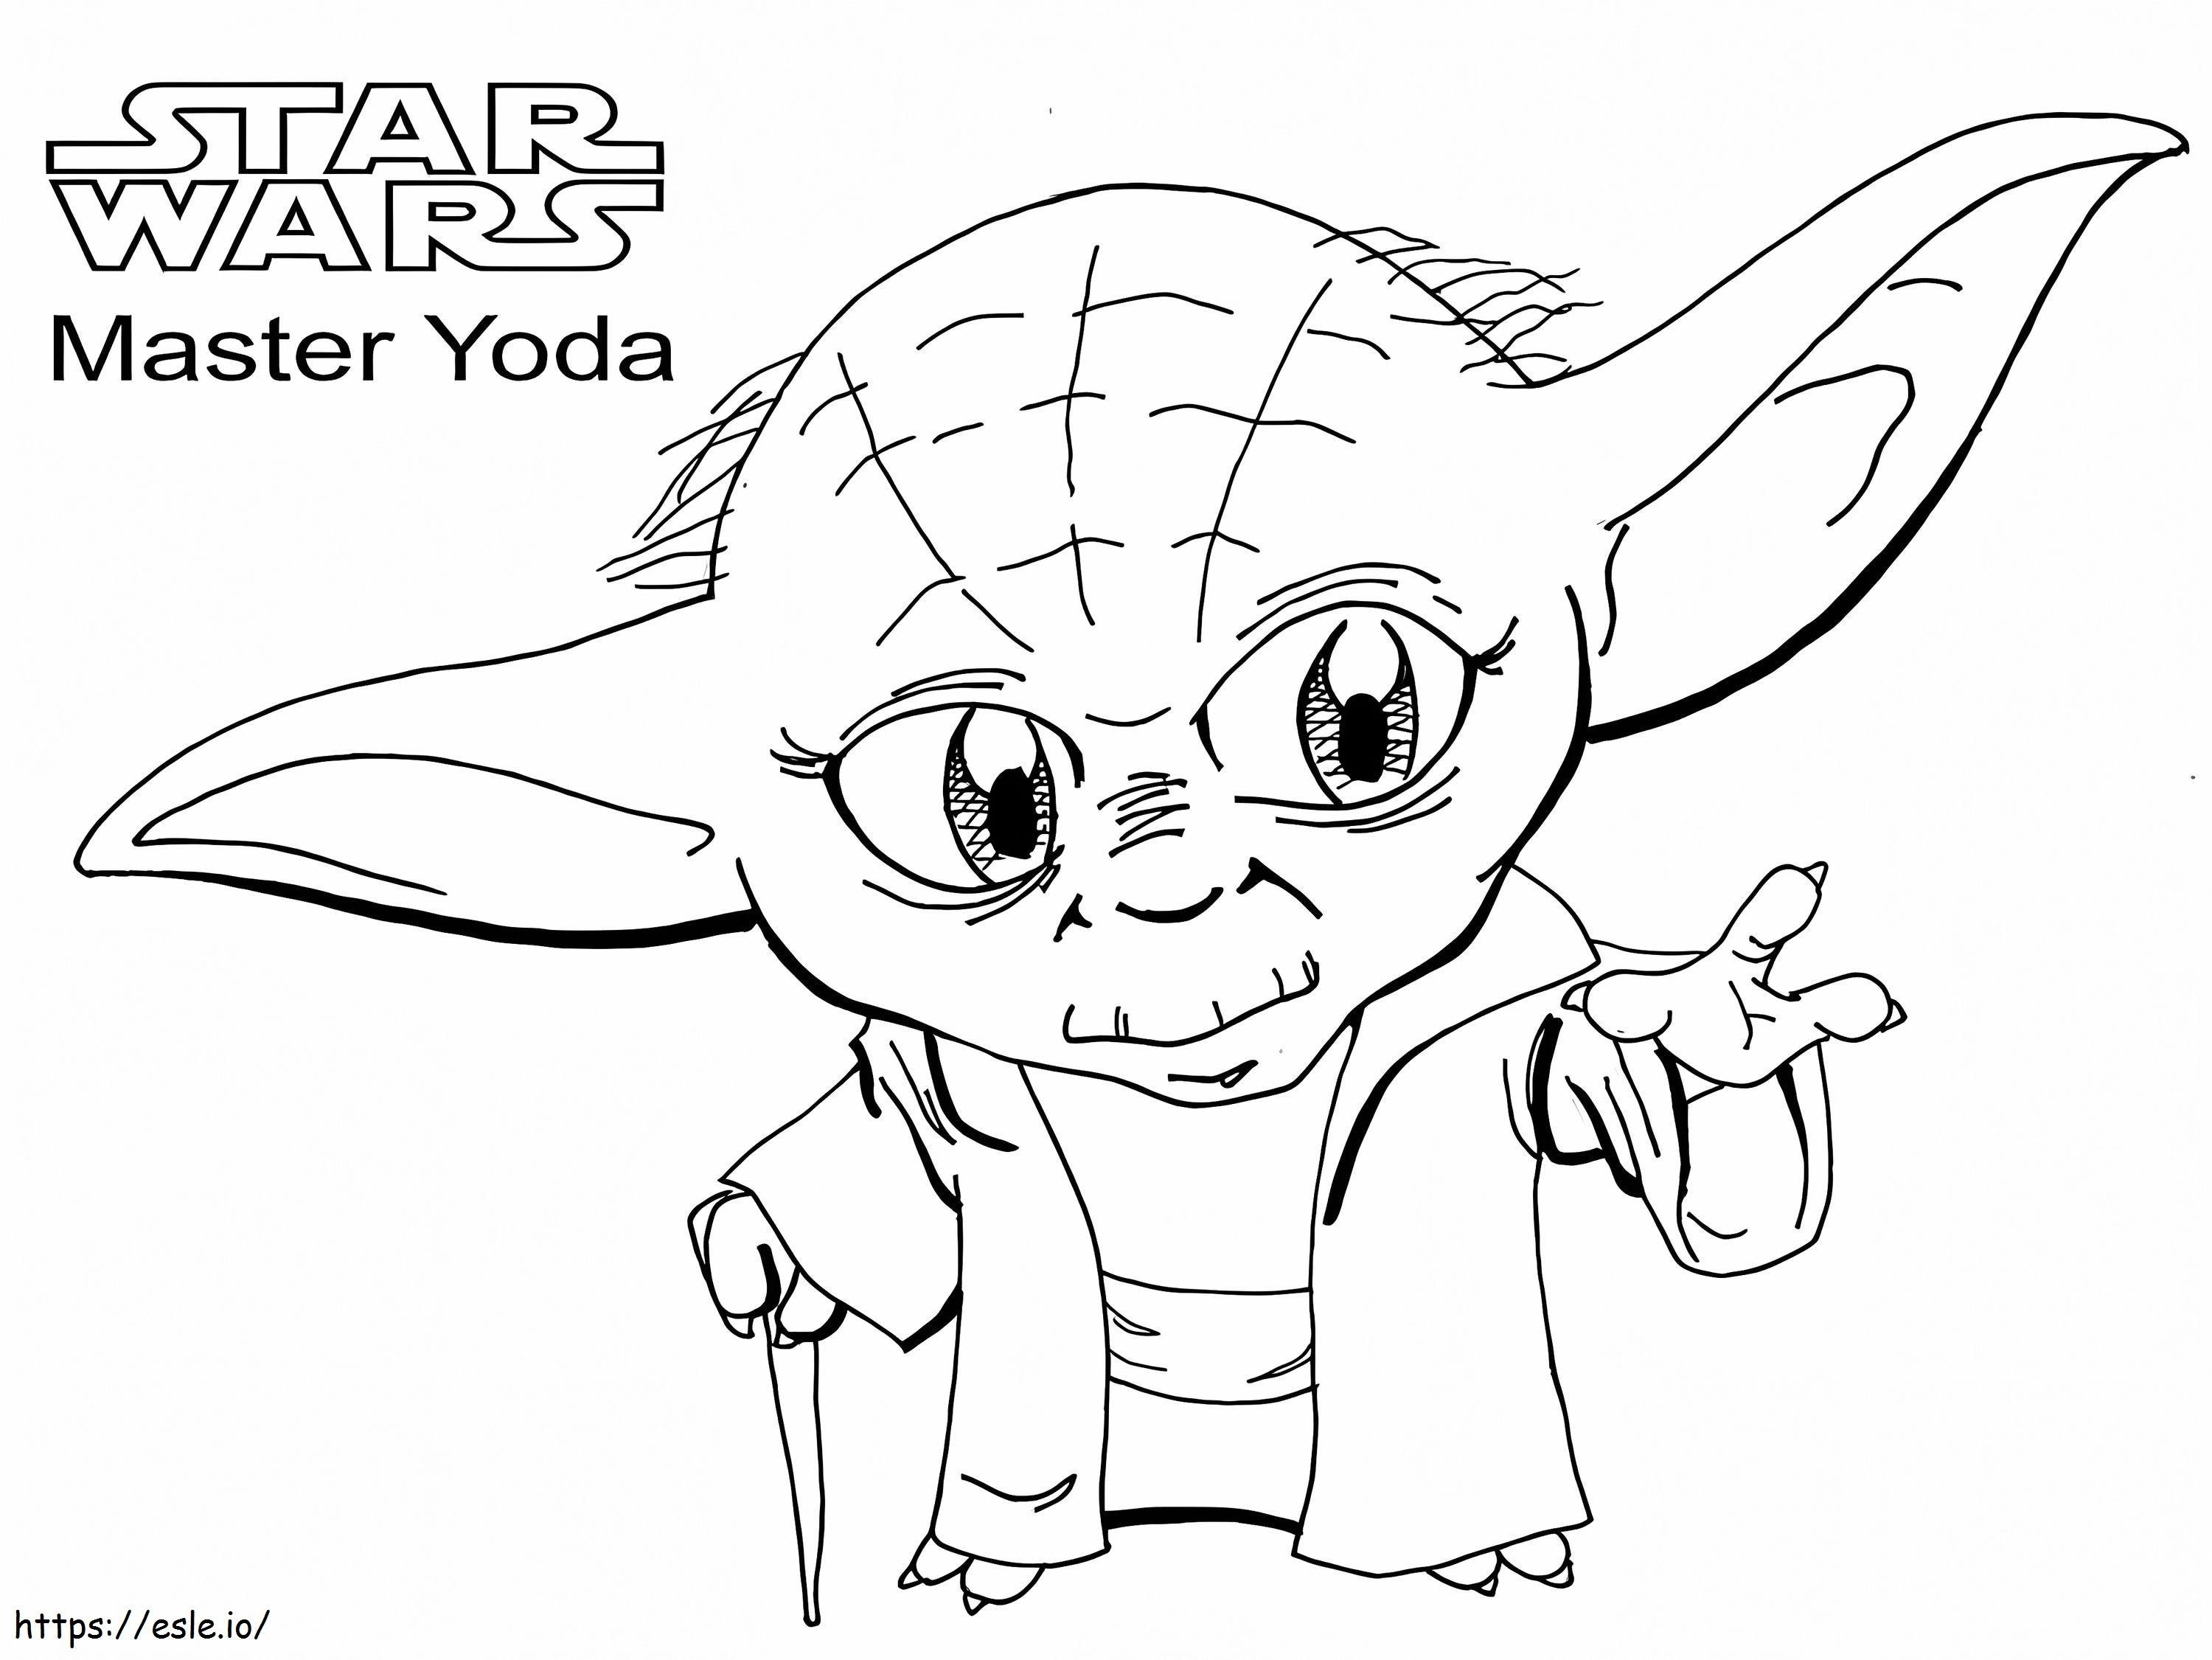 Little Master Yoda coloring page